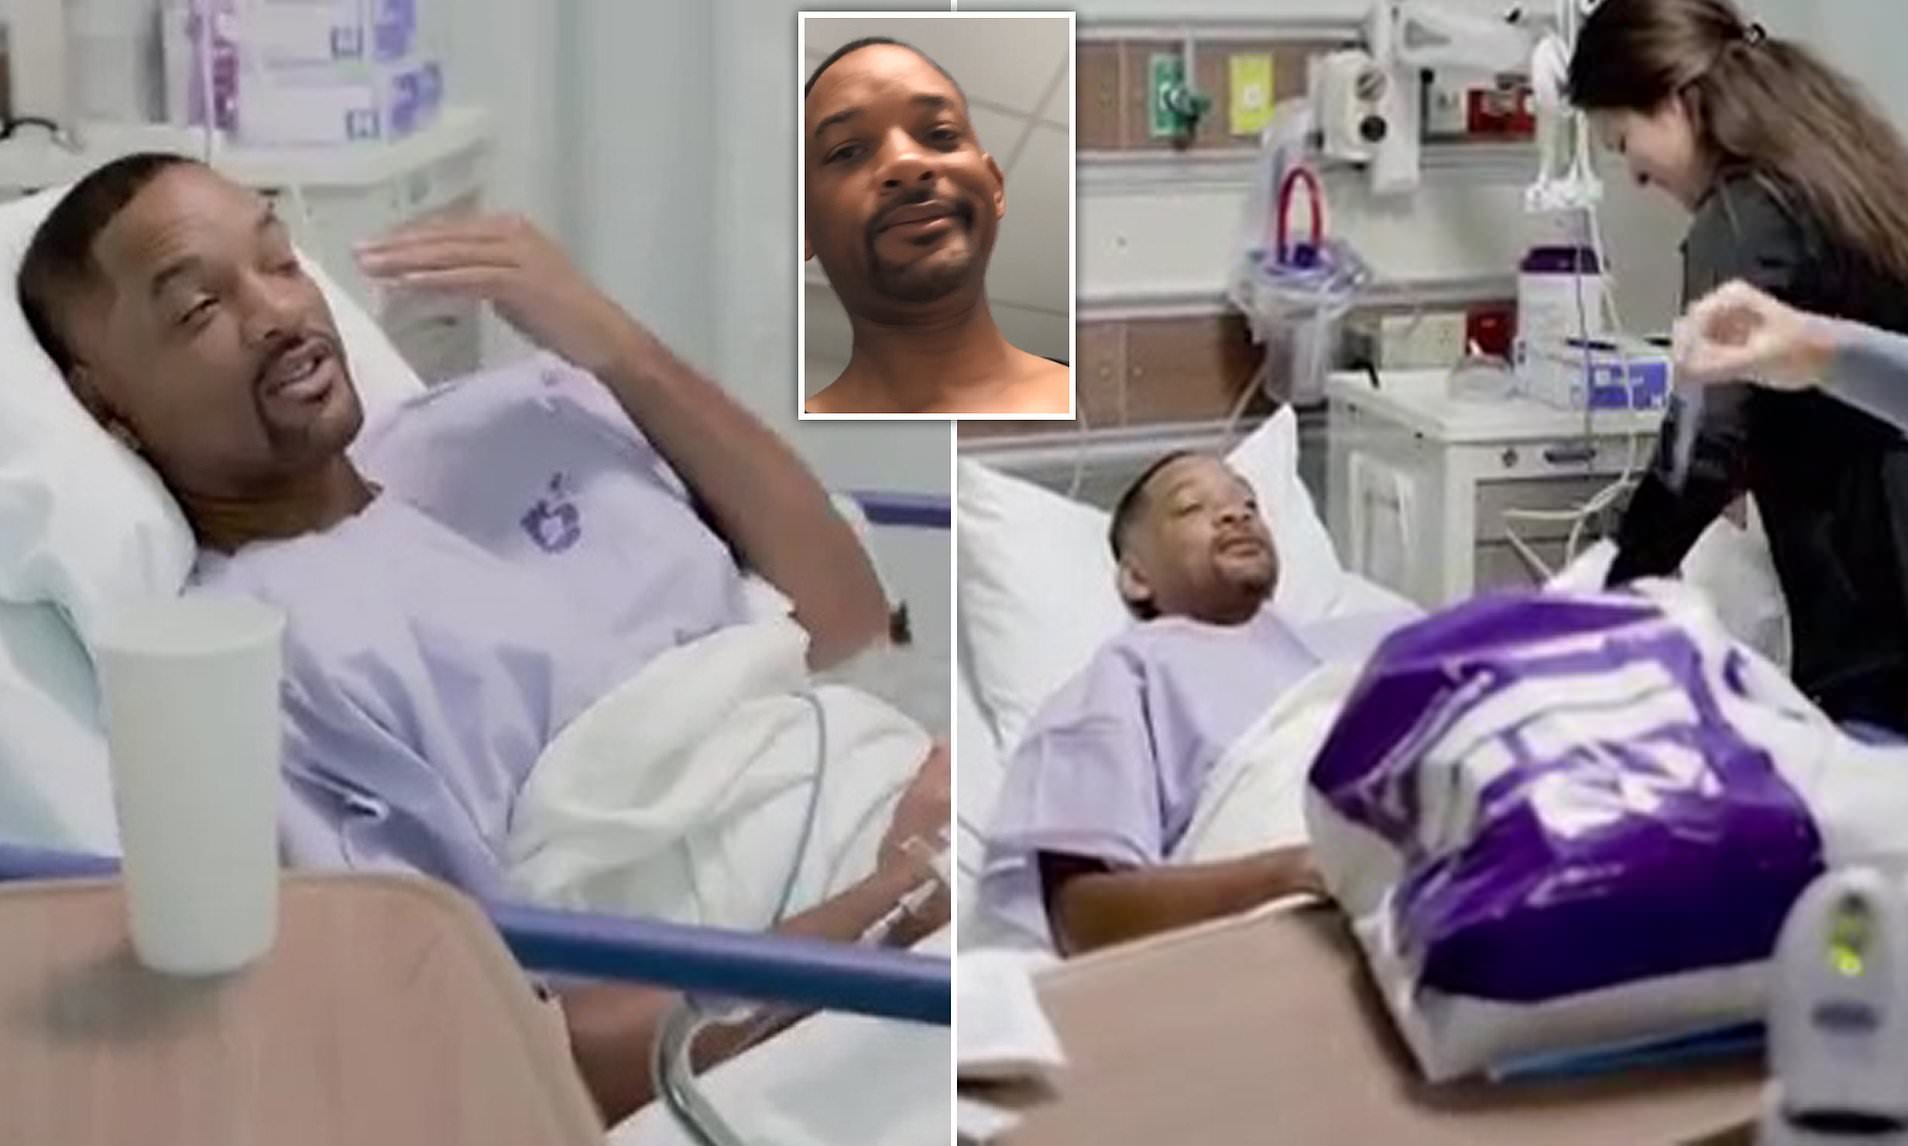 Will Smith bares his butt in Instagram post: ‘Here I am, gettin' a colonoscopy for the clout’